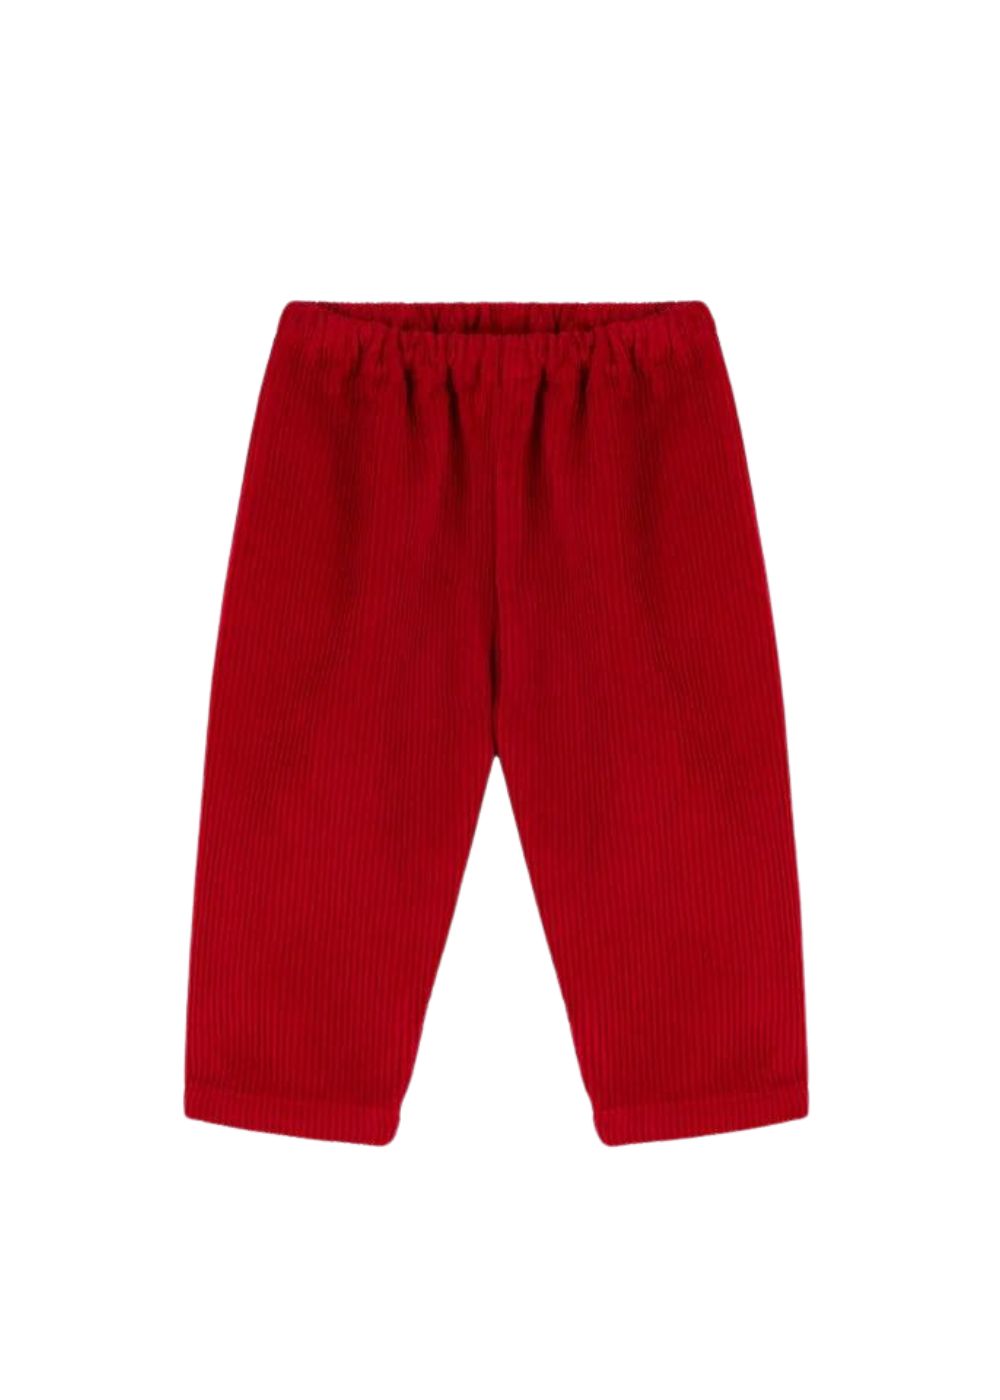 Featured image for “Petit Bateau Pantalone in velluto a coste”